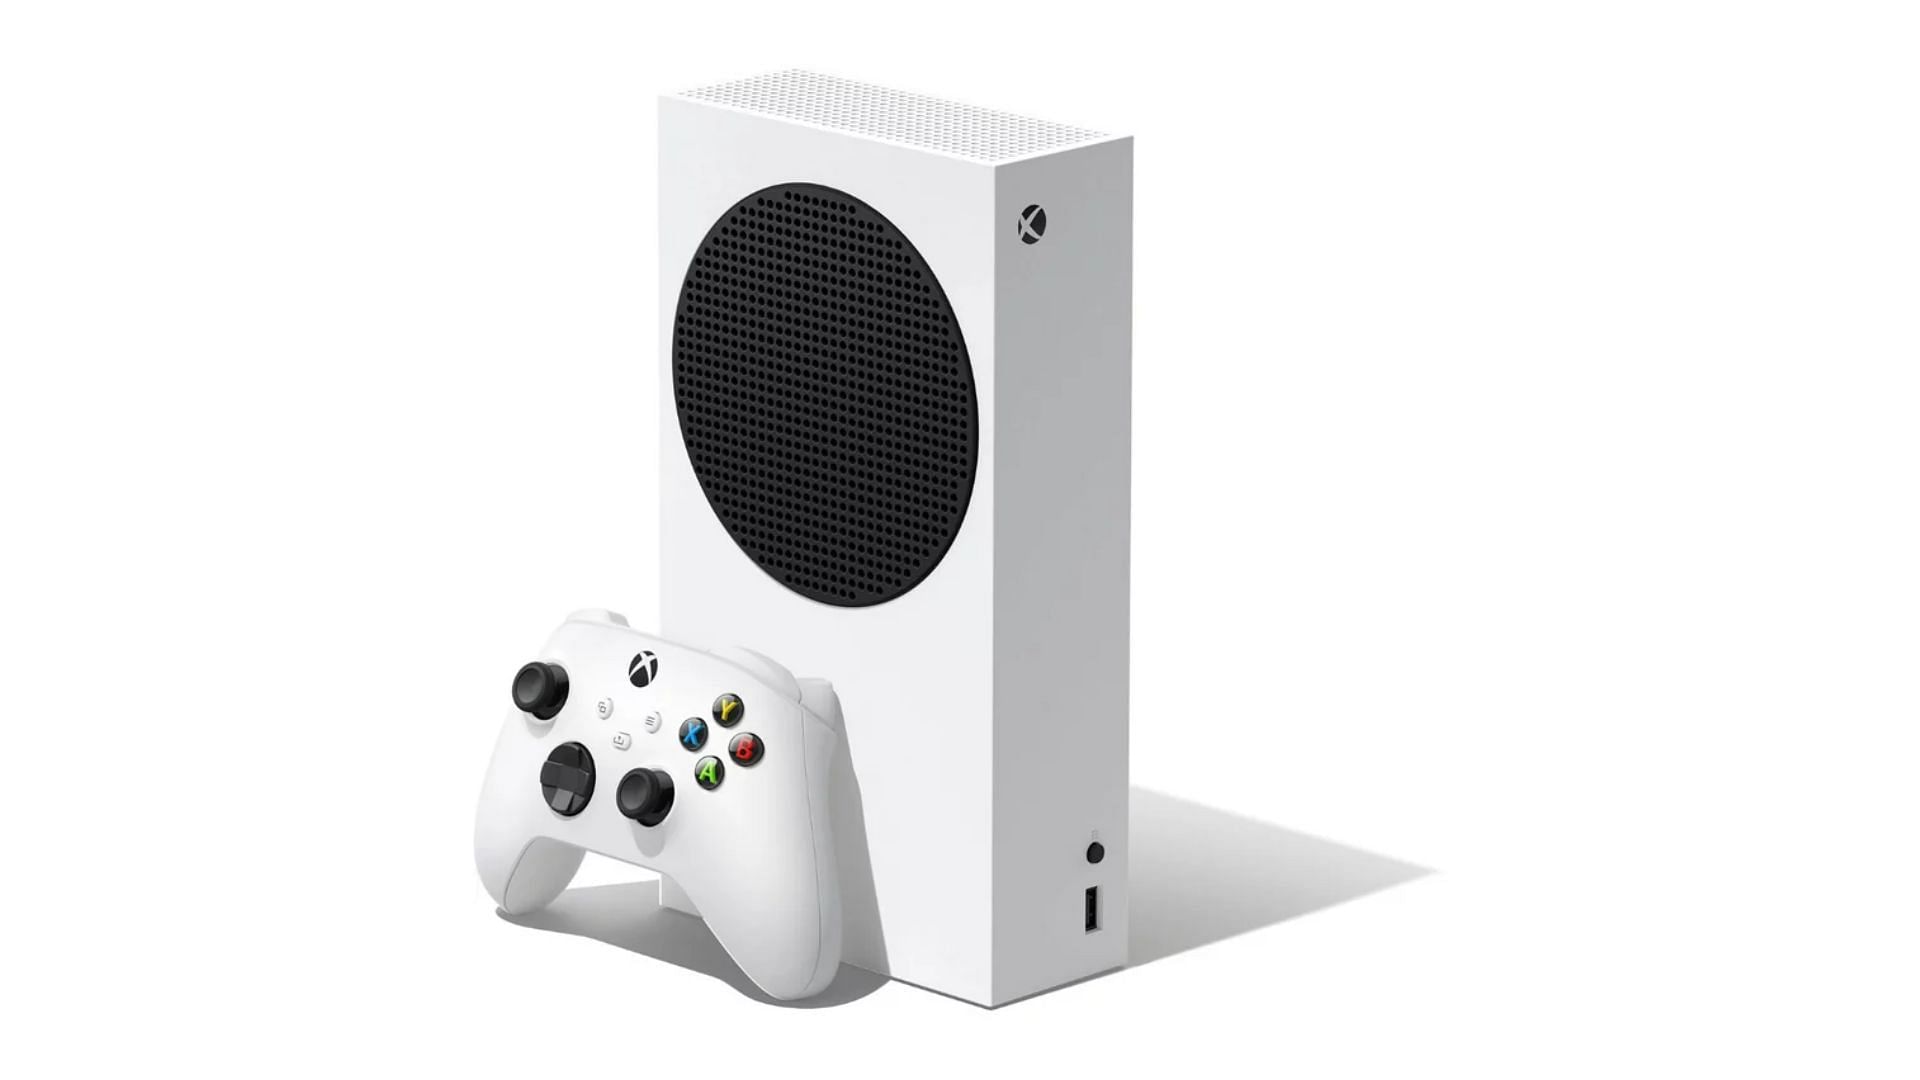 The Xbox Series S hits an all-time low price this Black Friday (Image via Microsoft)